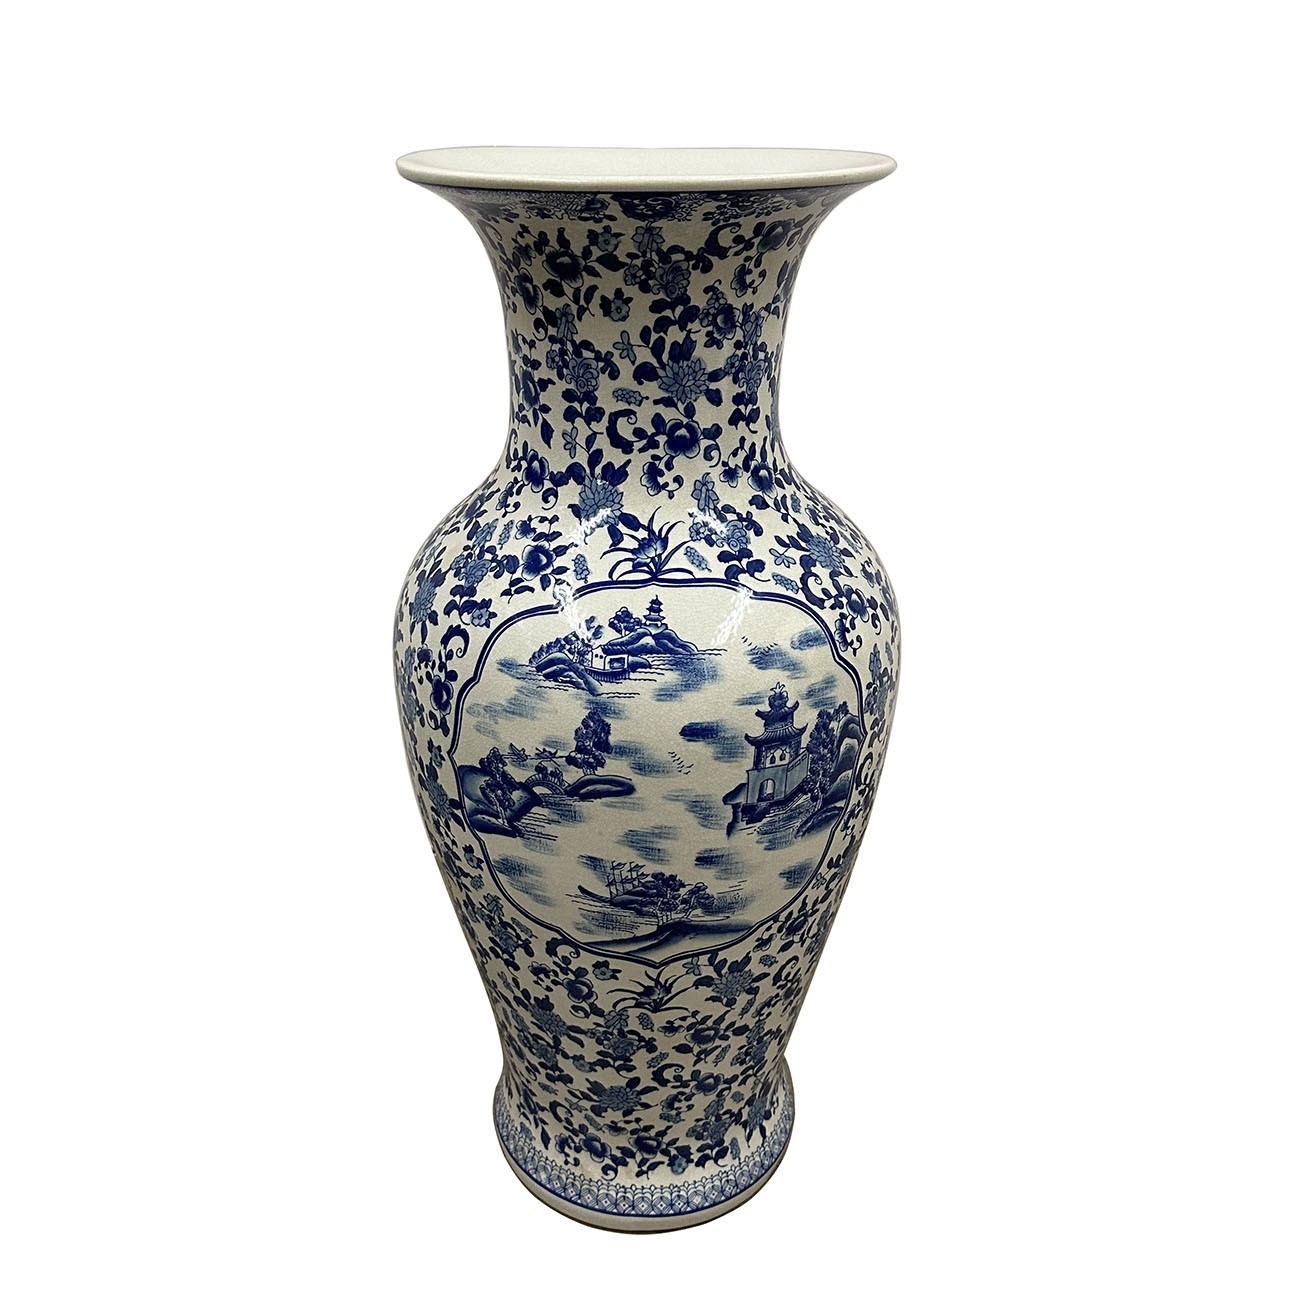 Late 19th Century Chinese White and Blue Porcelain Vase